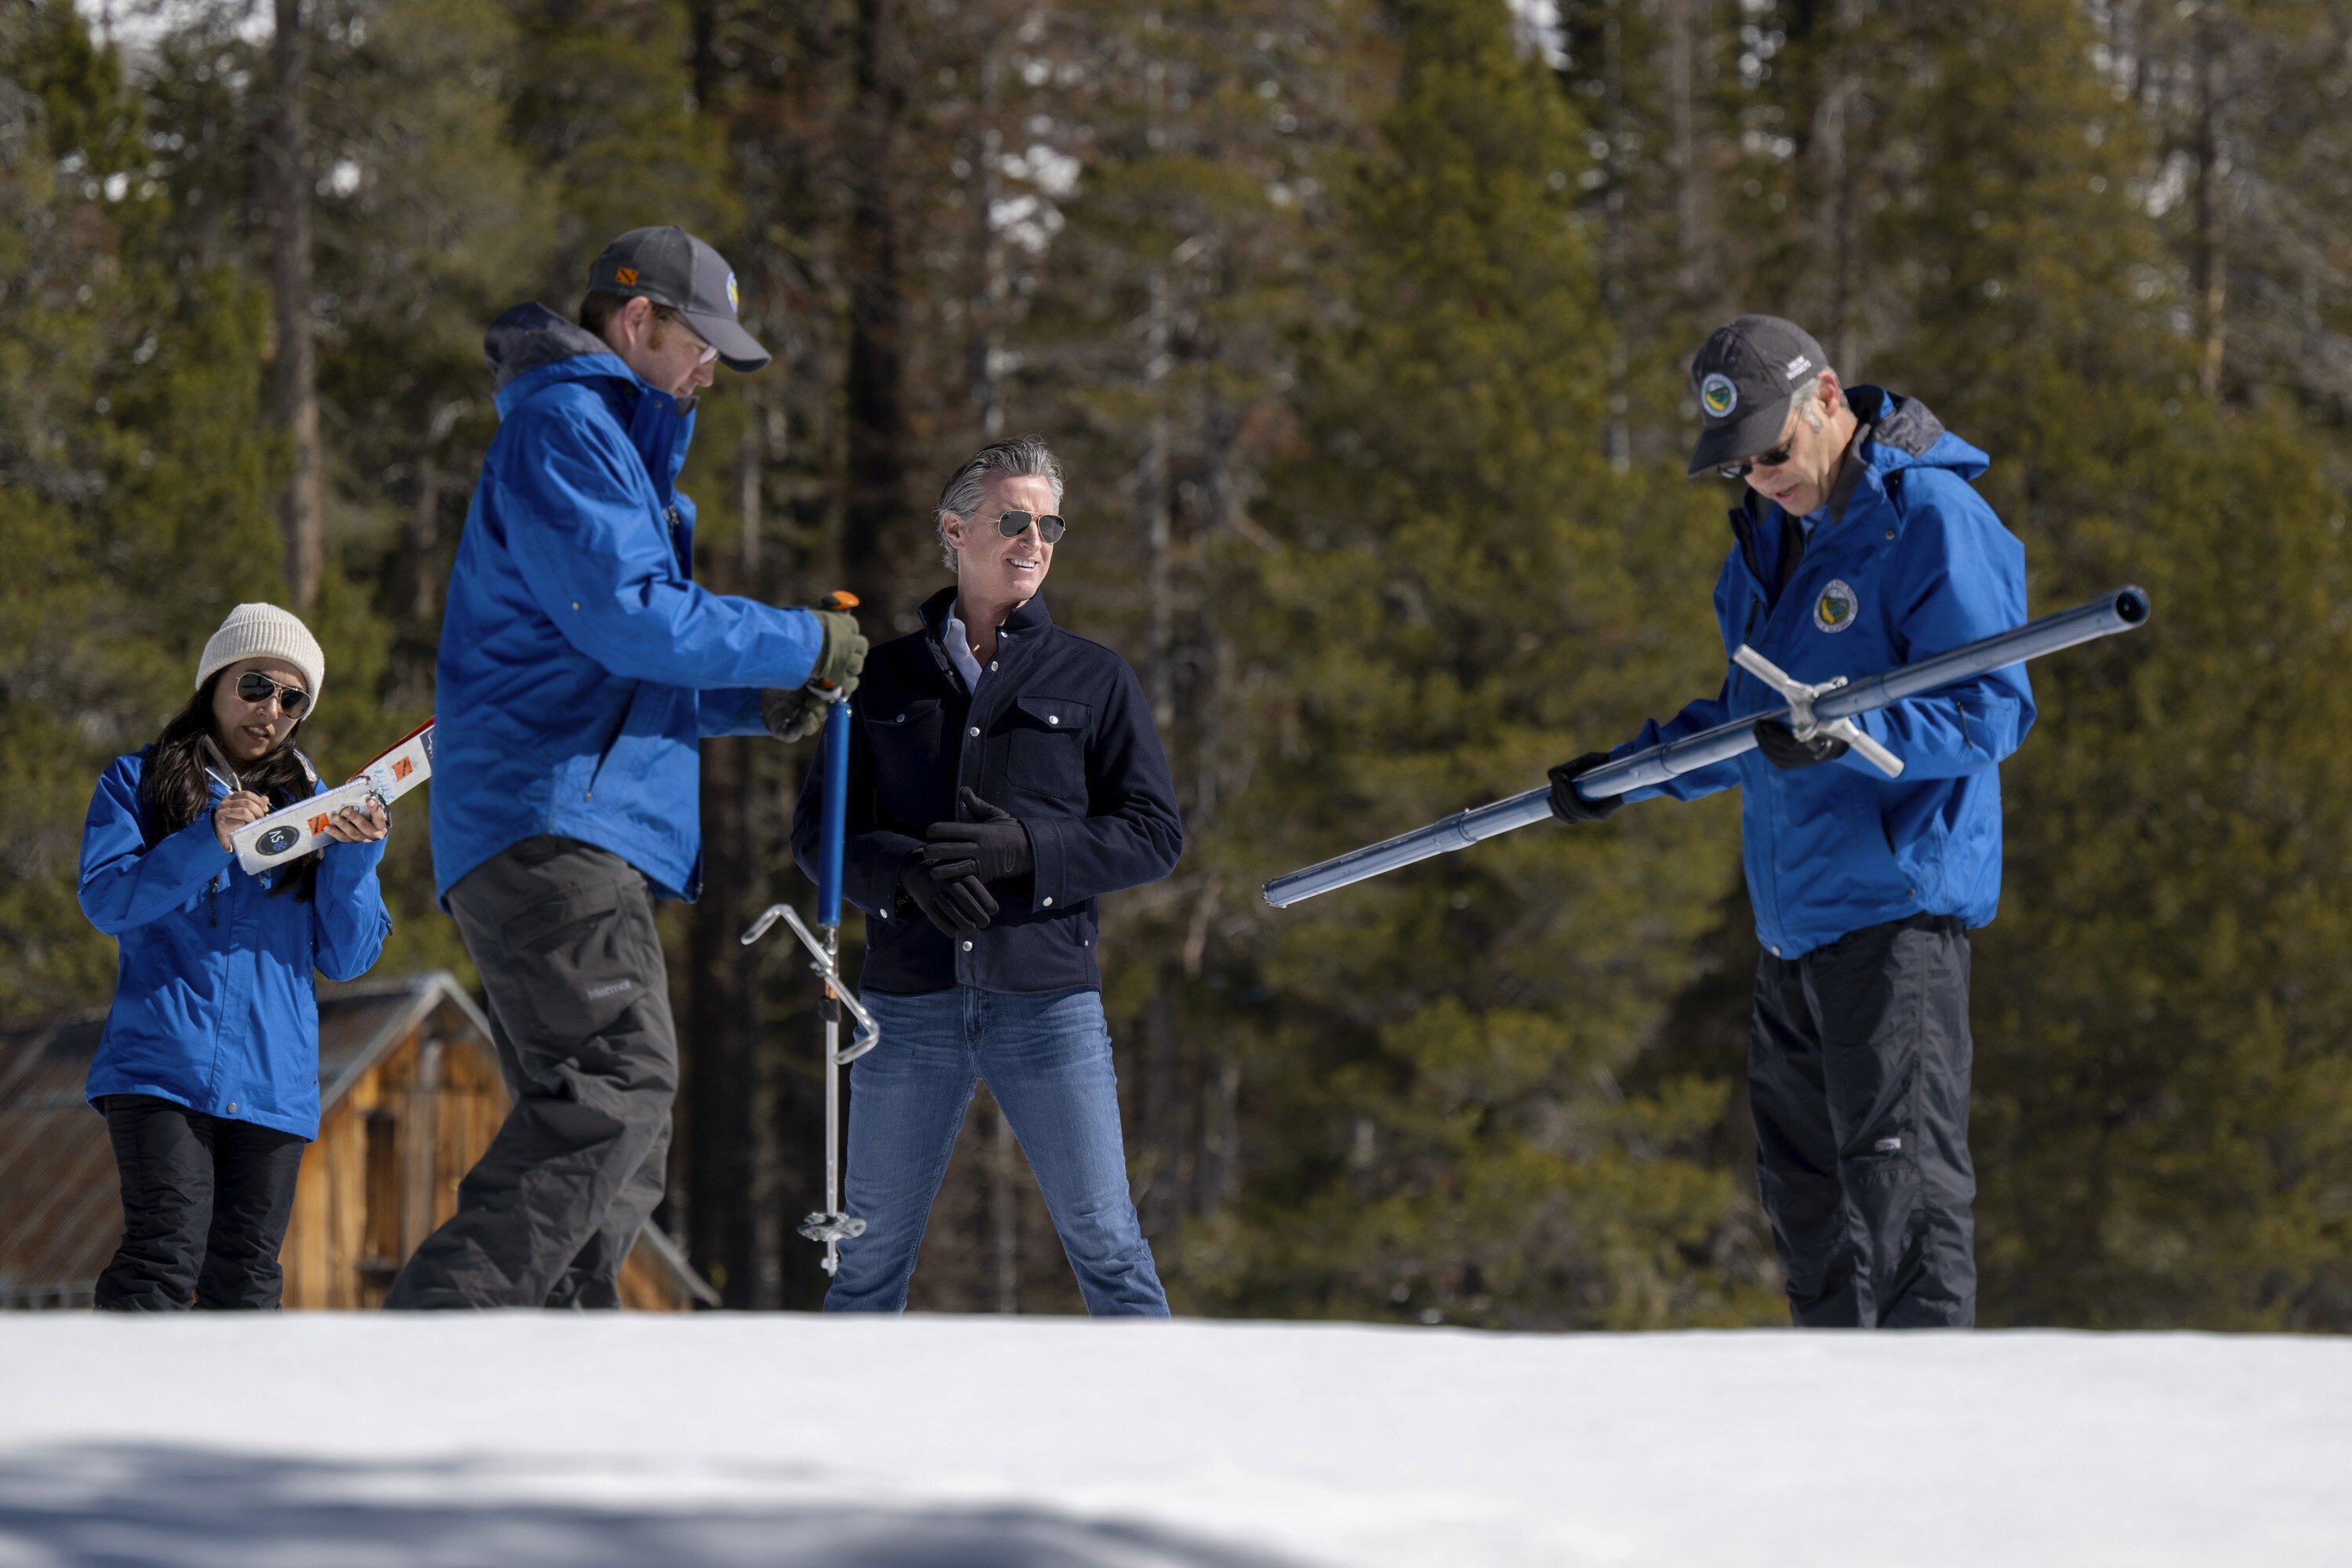 Four people in winter wear stand on snow, holding biathlon rifles, with trees in the background.